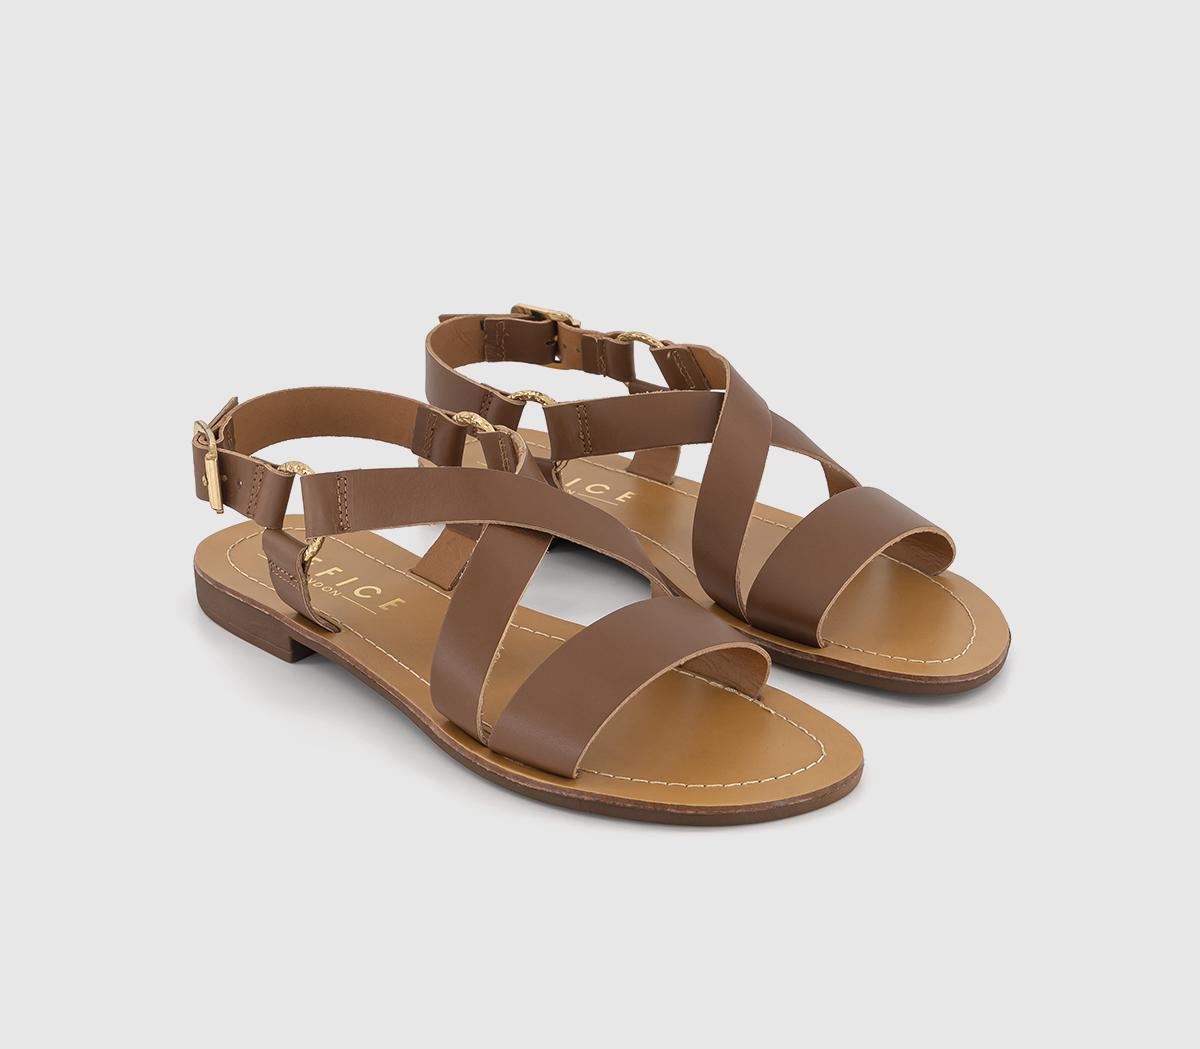 OFFICE Womens Sequence Cross Over Flat Sandals Tan Leather, 3